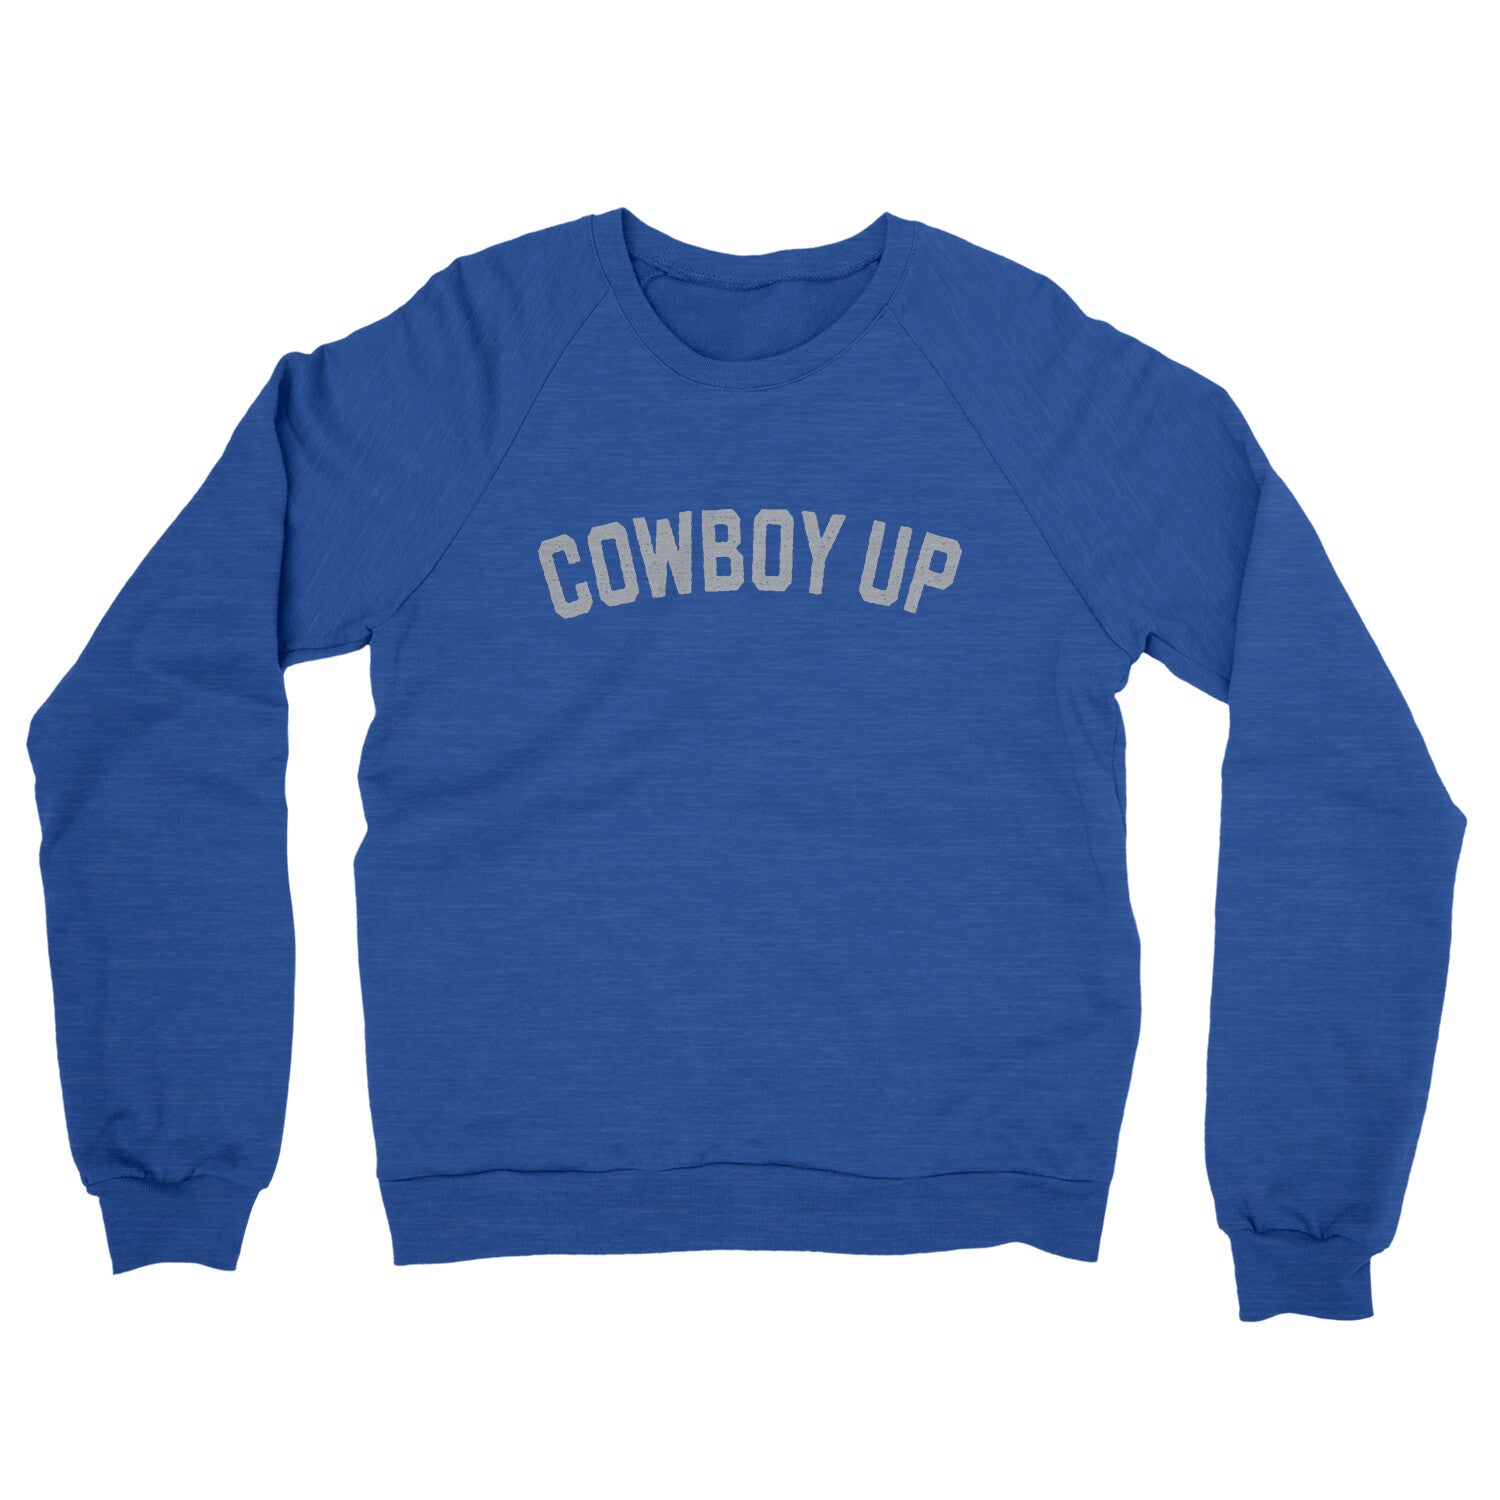 Cowboy Up in Heather Royal Color